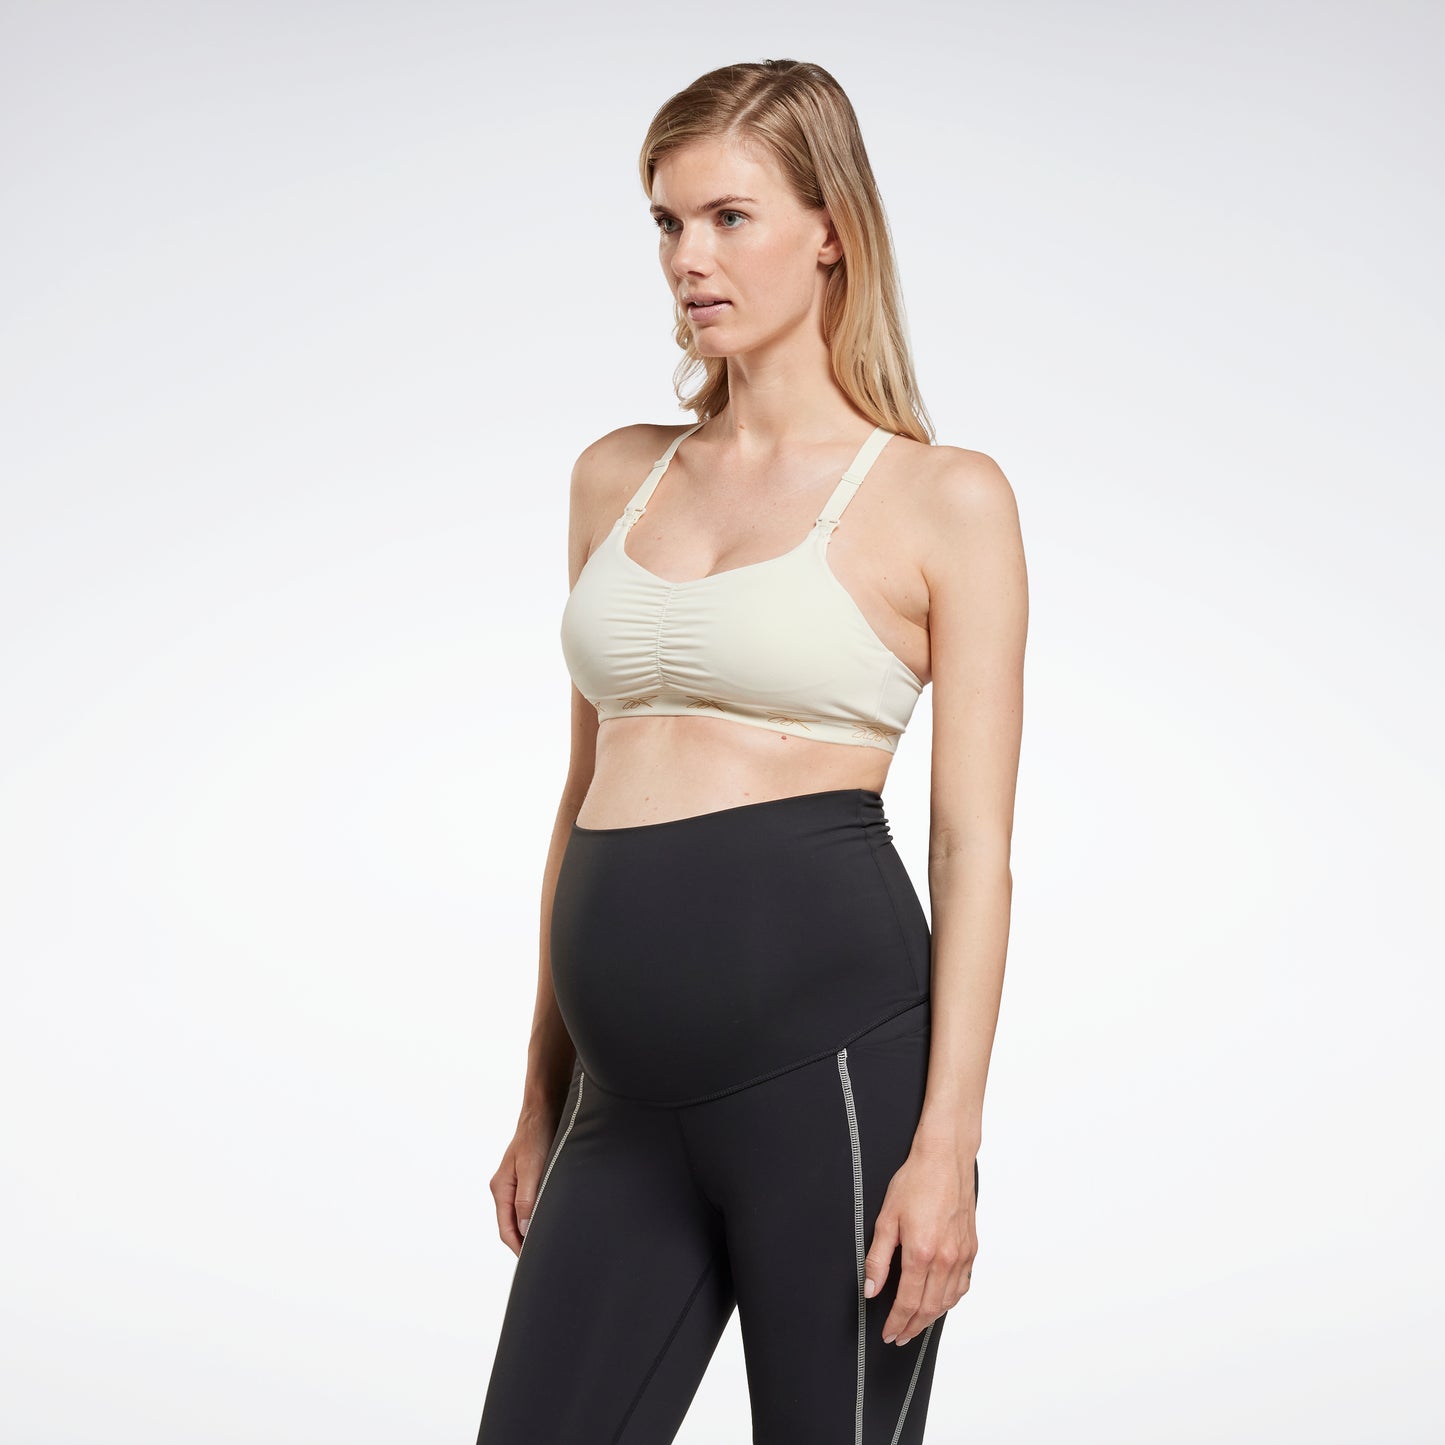 KALYX Sports Bras for the Active Woman - The Socialite's Closet